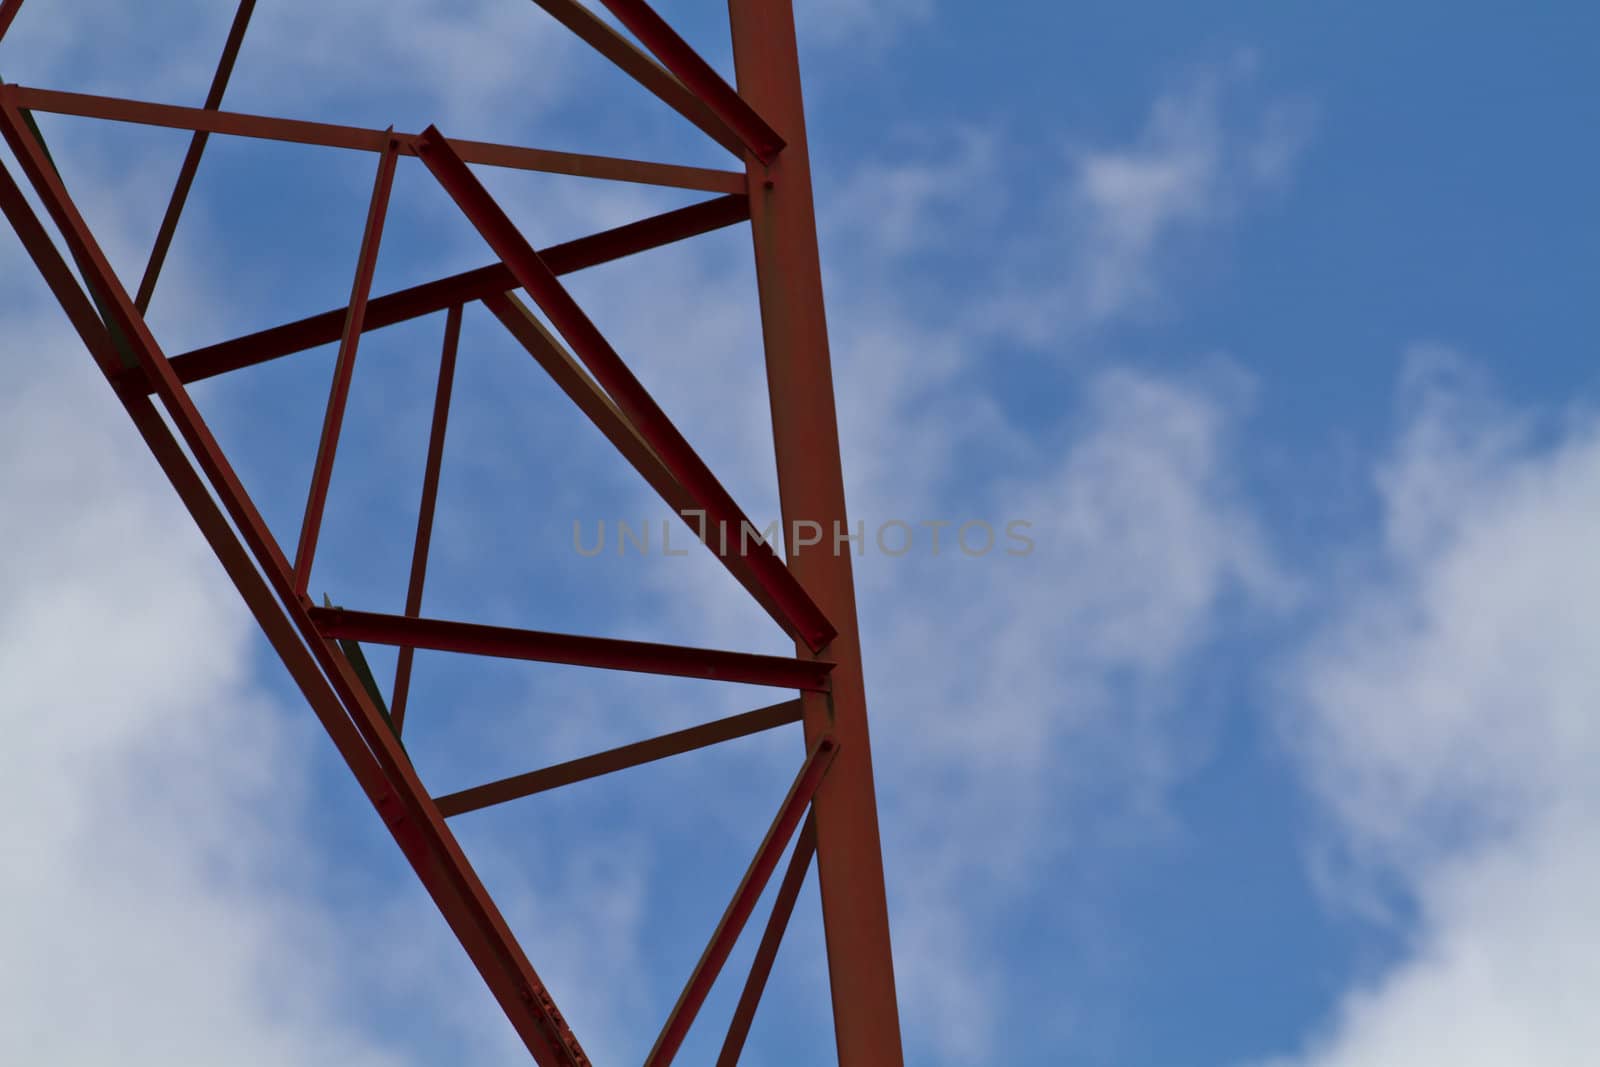 Close up view of the raio tower leg against blue sky